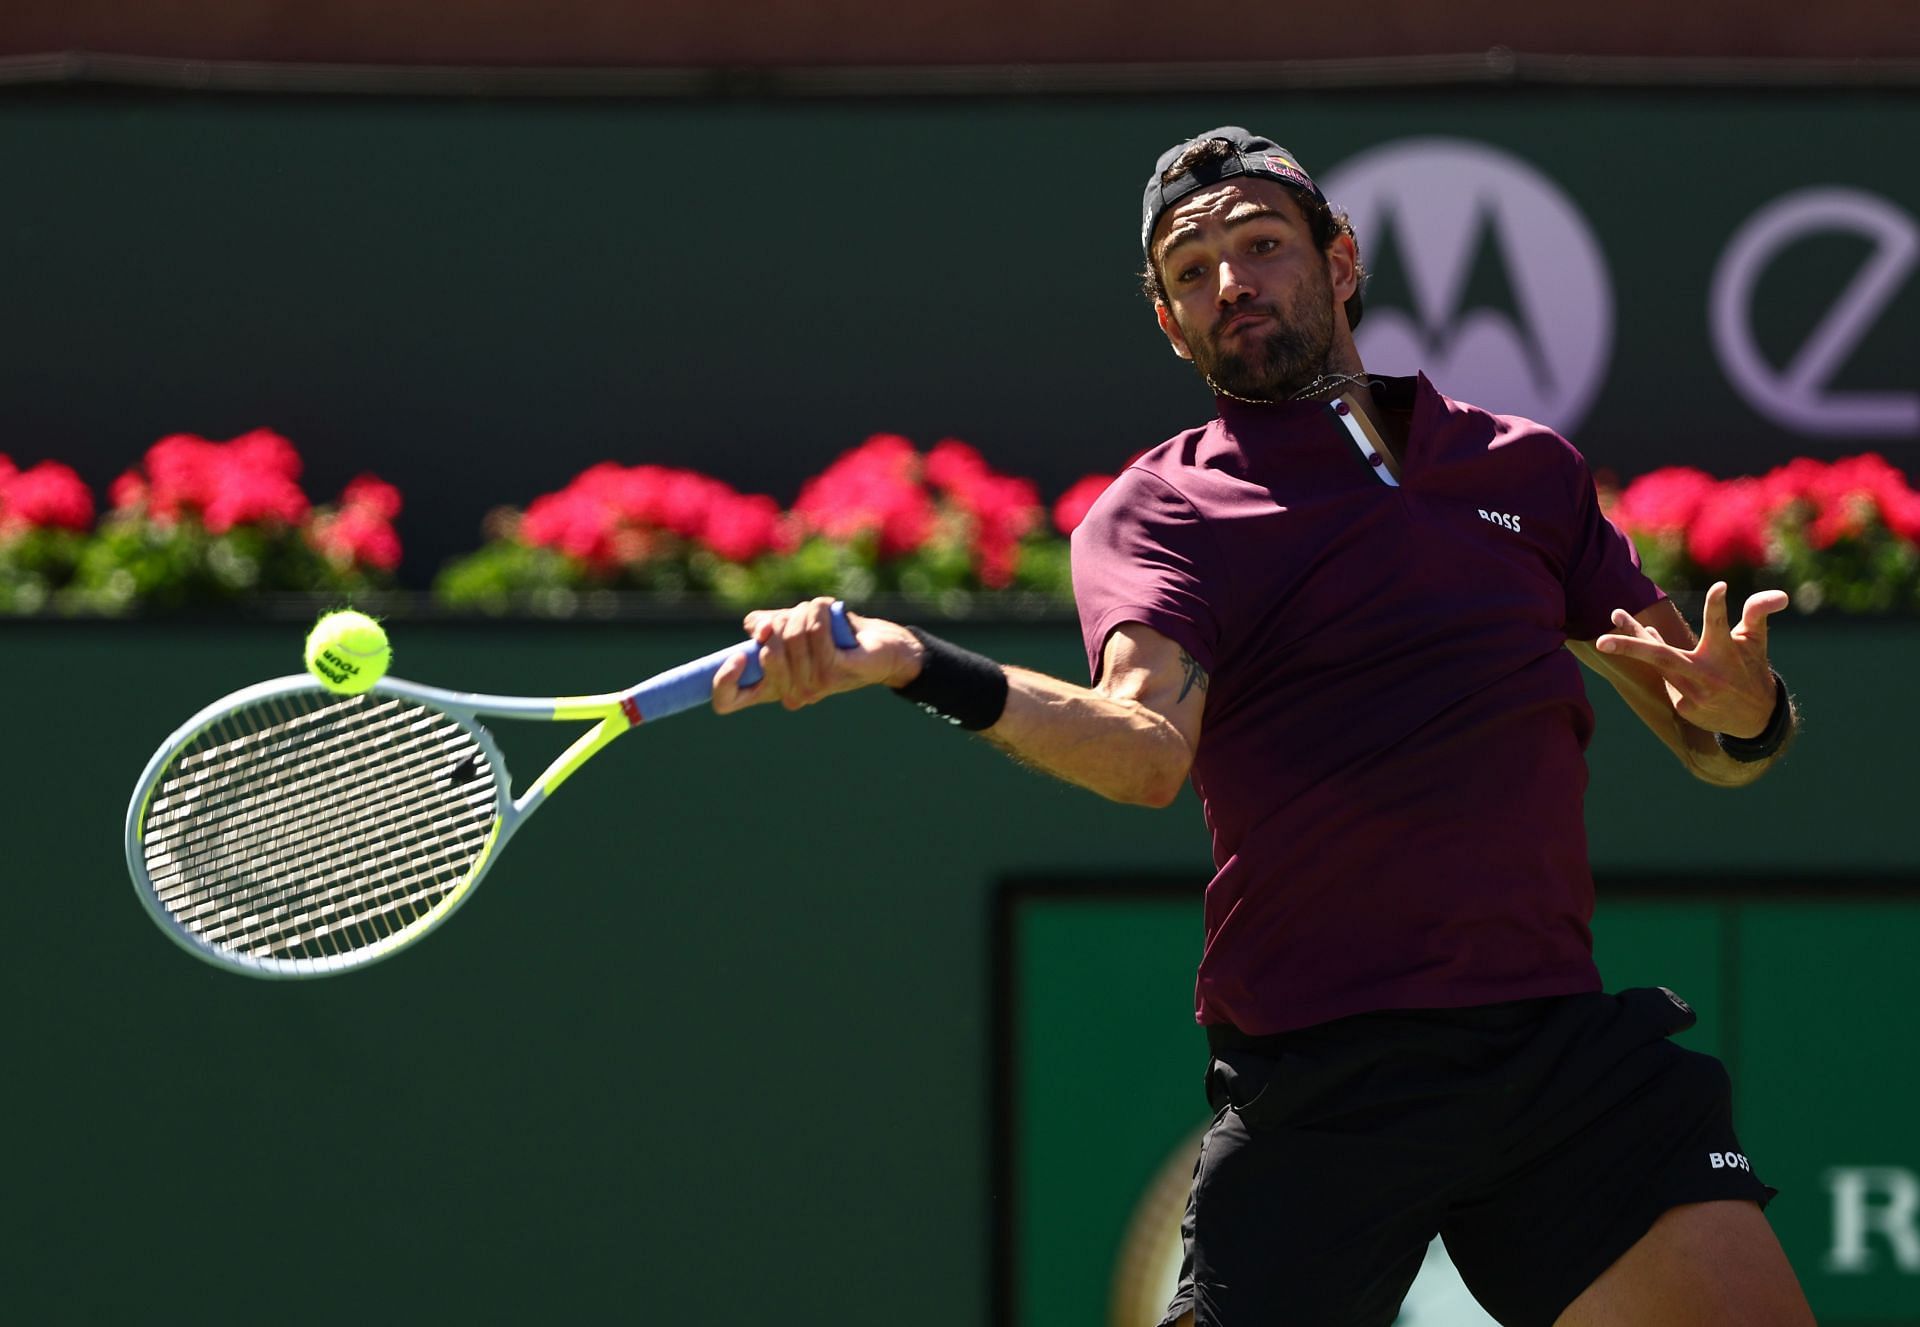 Matteo Berrettini will look to reach the quarterfinals of the Indian Wells Masters